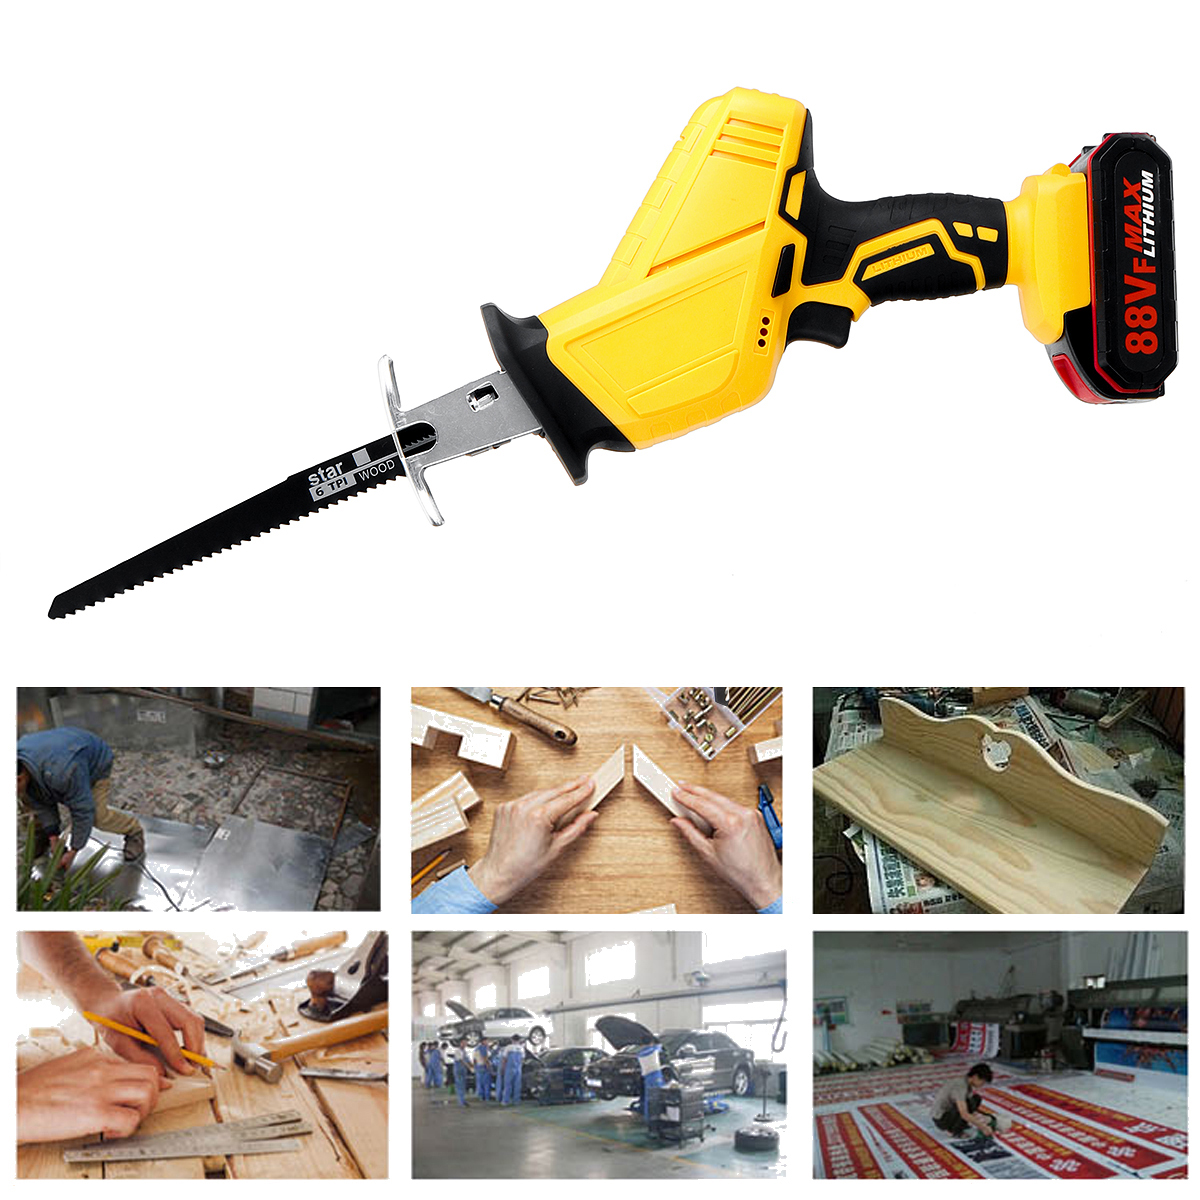 88VF-Cordless-Electric-Reciprocating-Saw-W-4-Blades--1or2-Battery-for-Worx-Woodworking-Wood-Cutting--1878507-6